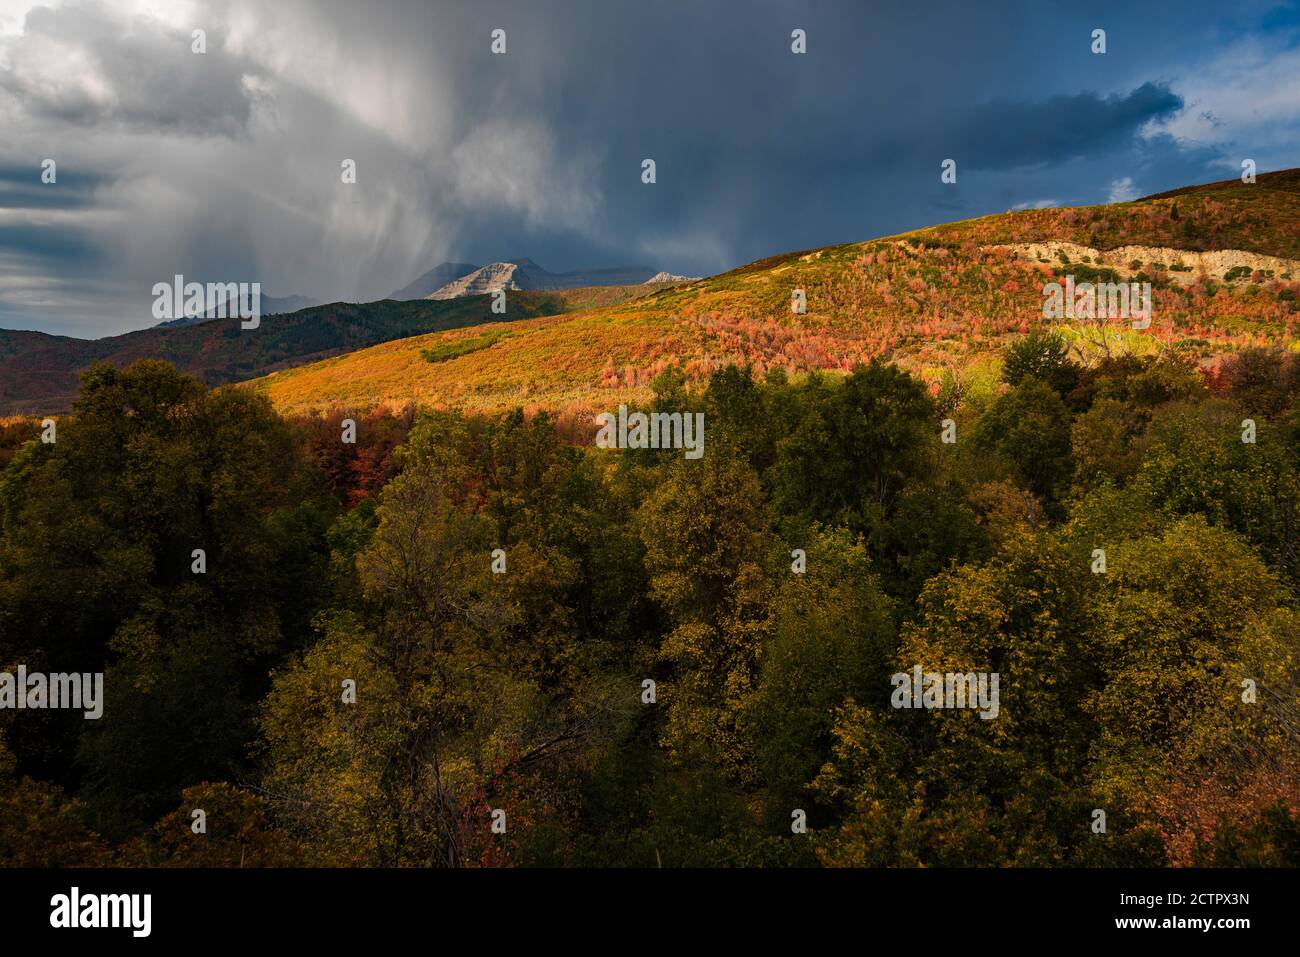 Thunderstorm in the mountains.  Quick and sometimes violent thunderstorms can develop over the high mountains of Utah, USA in the Fall. Stock Photo